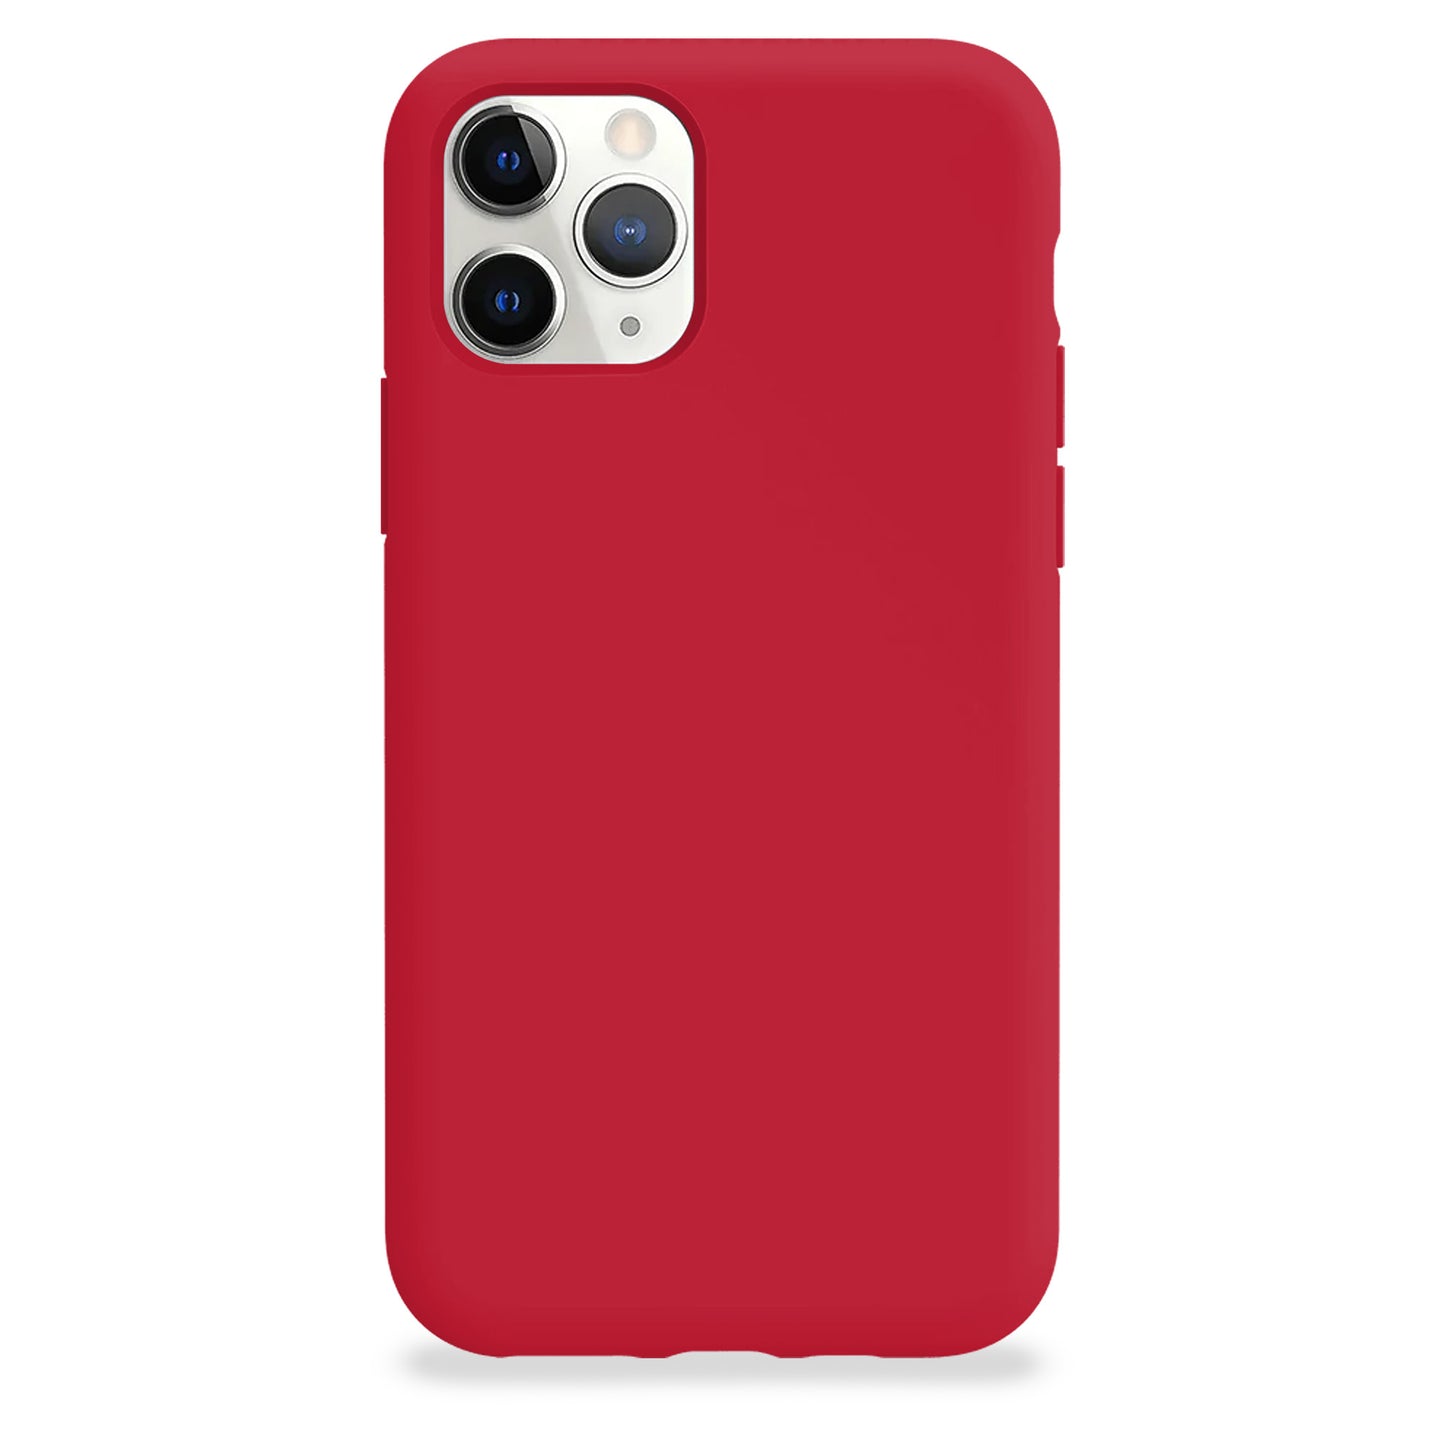 Carmine silicone case for iPhone and Samsung